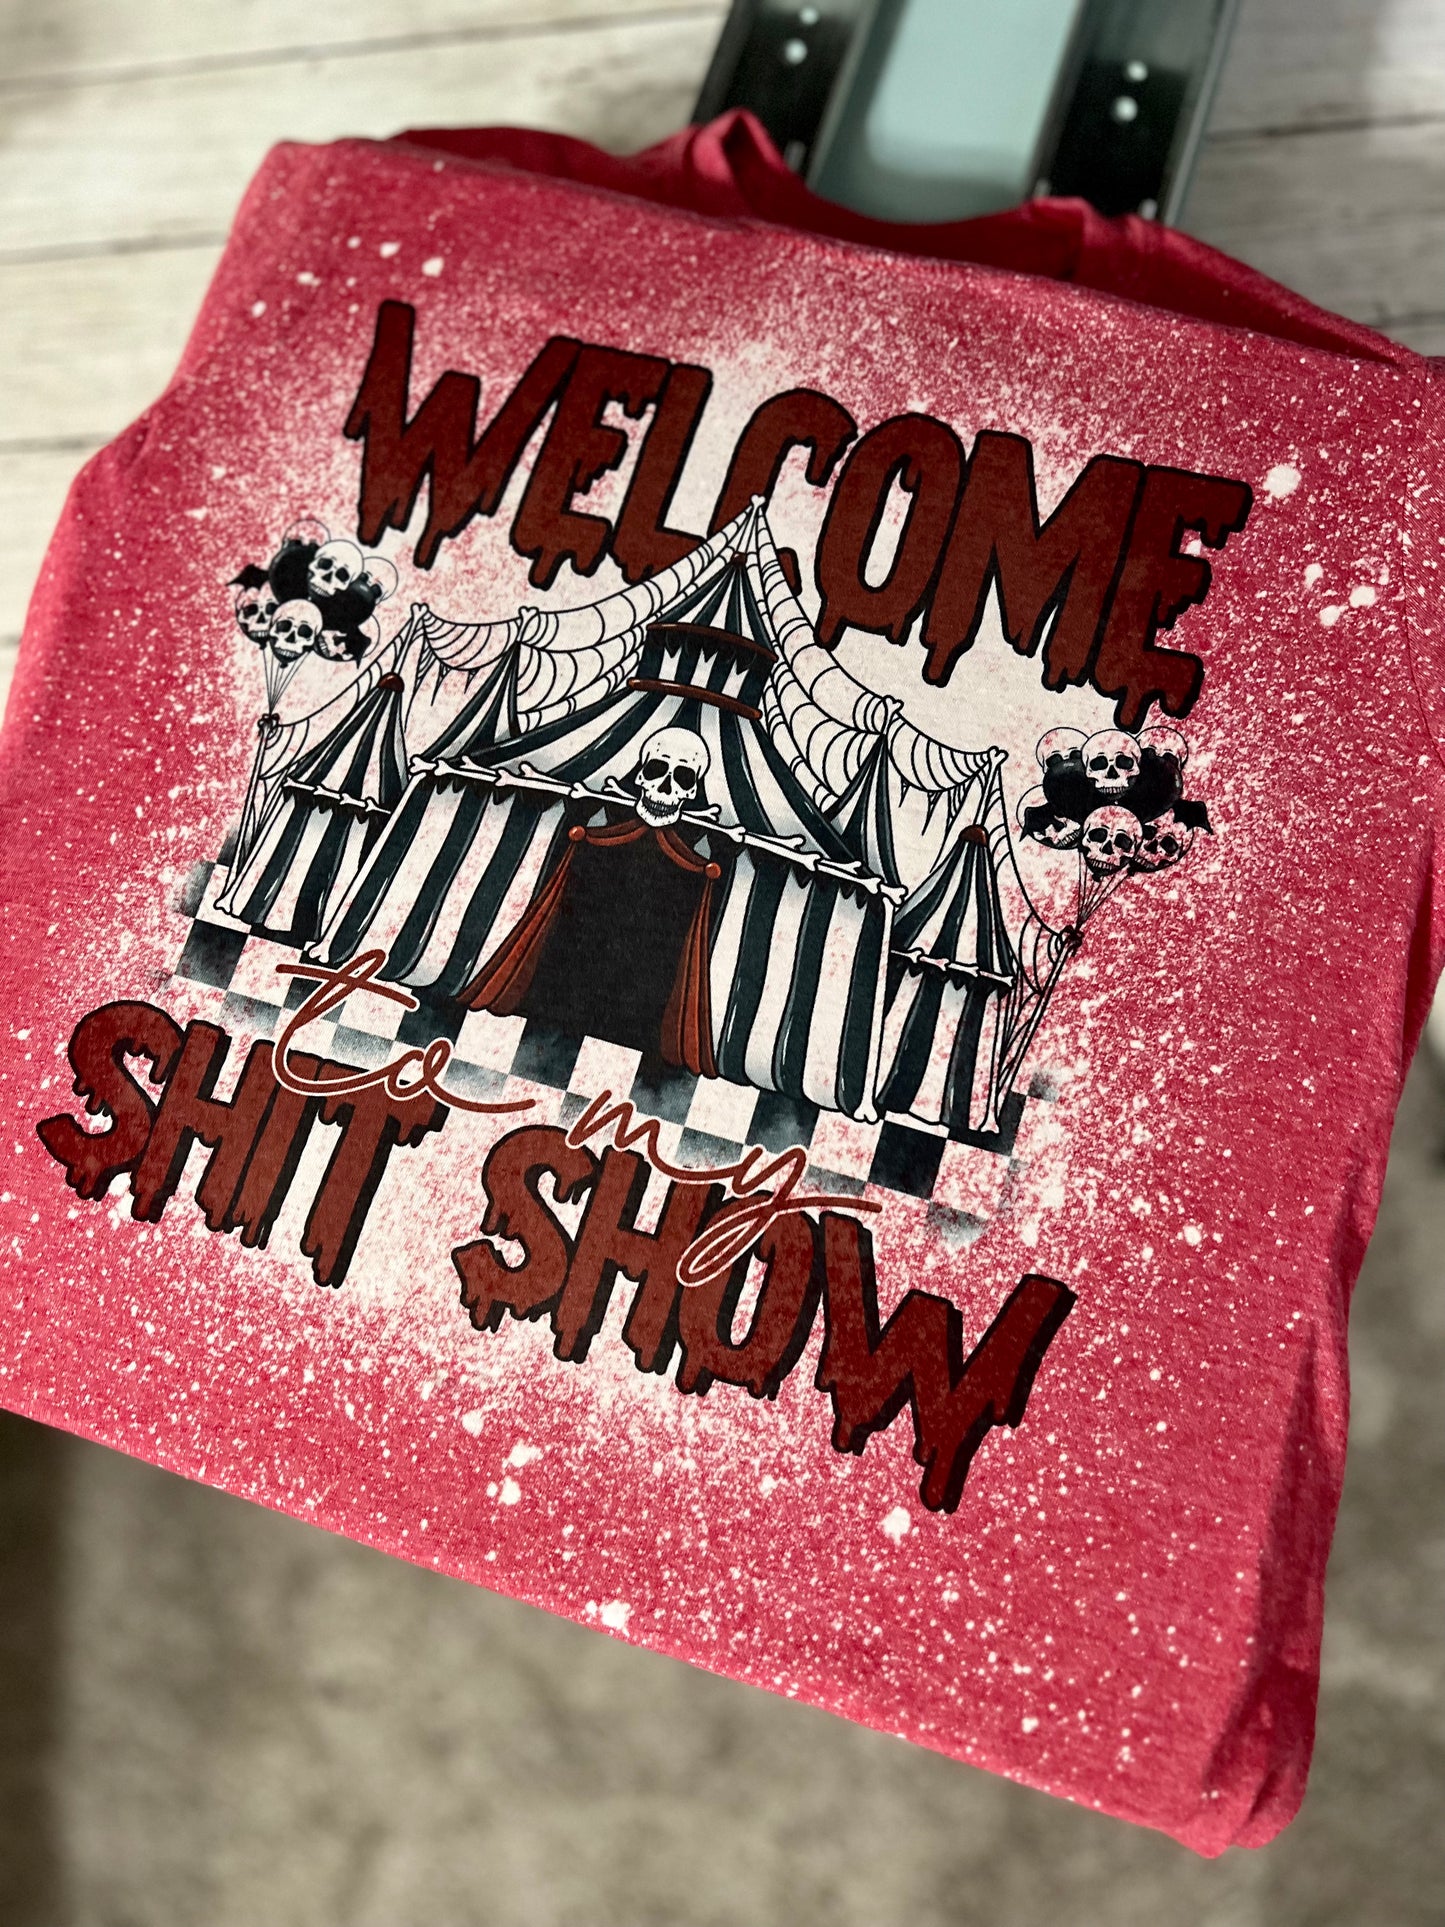 Welcome to my show tee